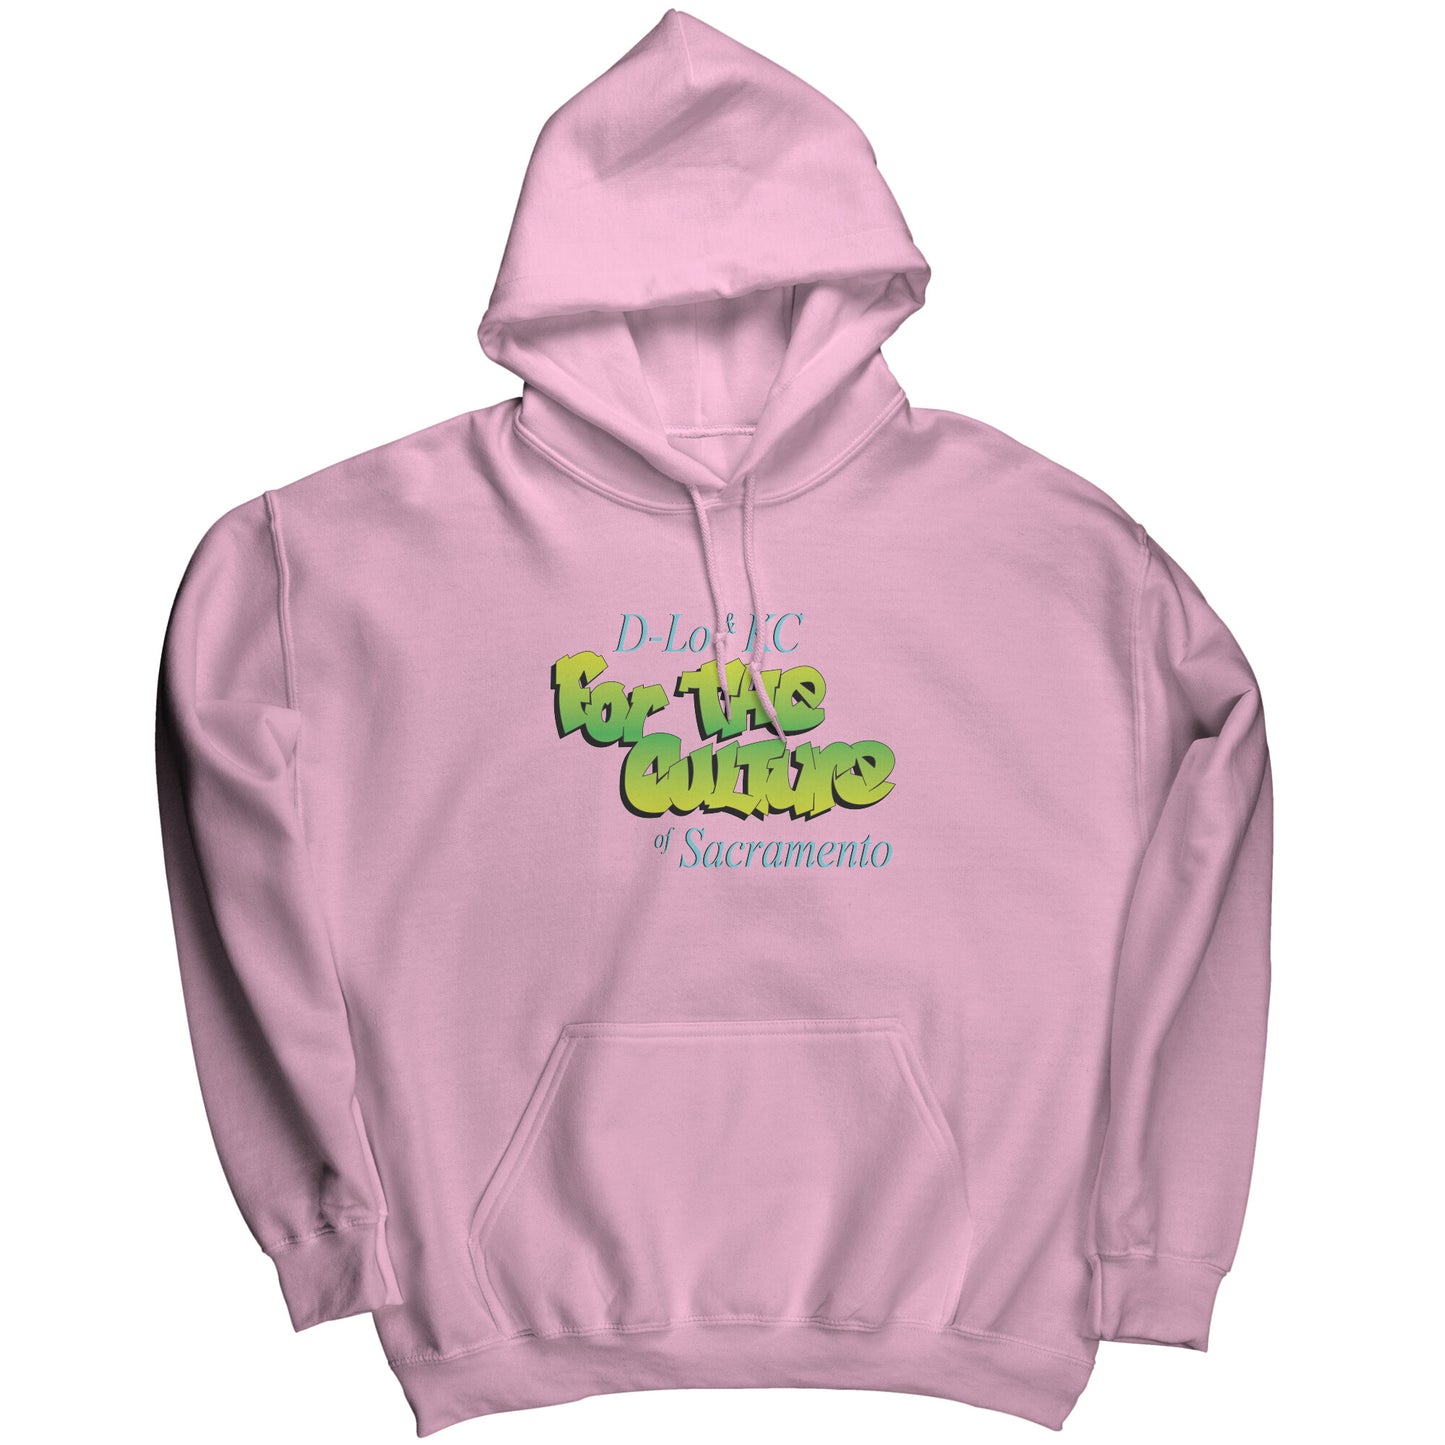 Fresh Prince: For The Culture Hoodie